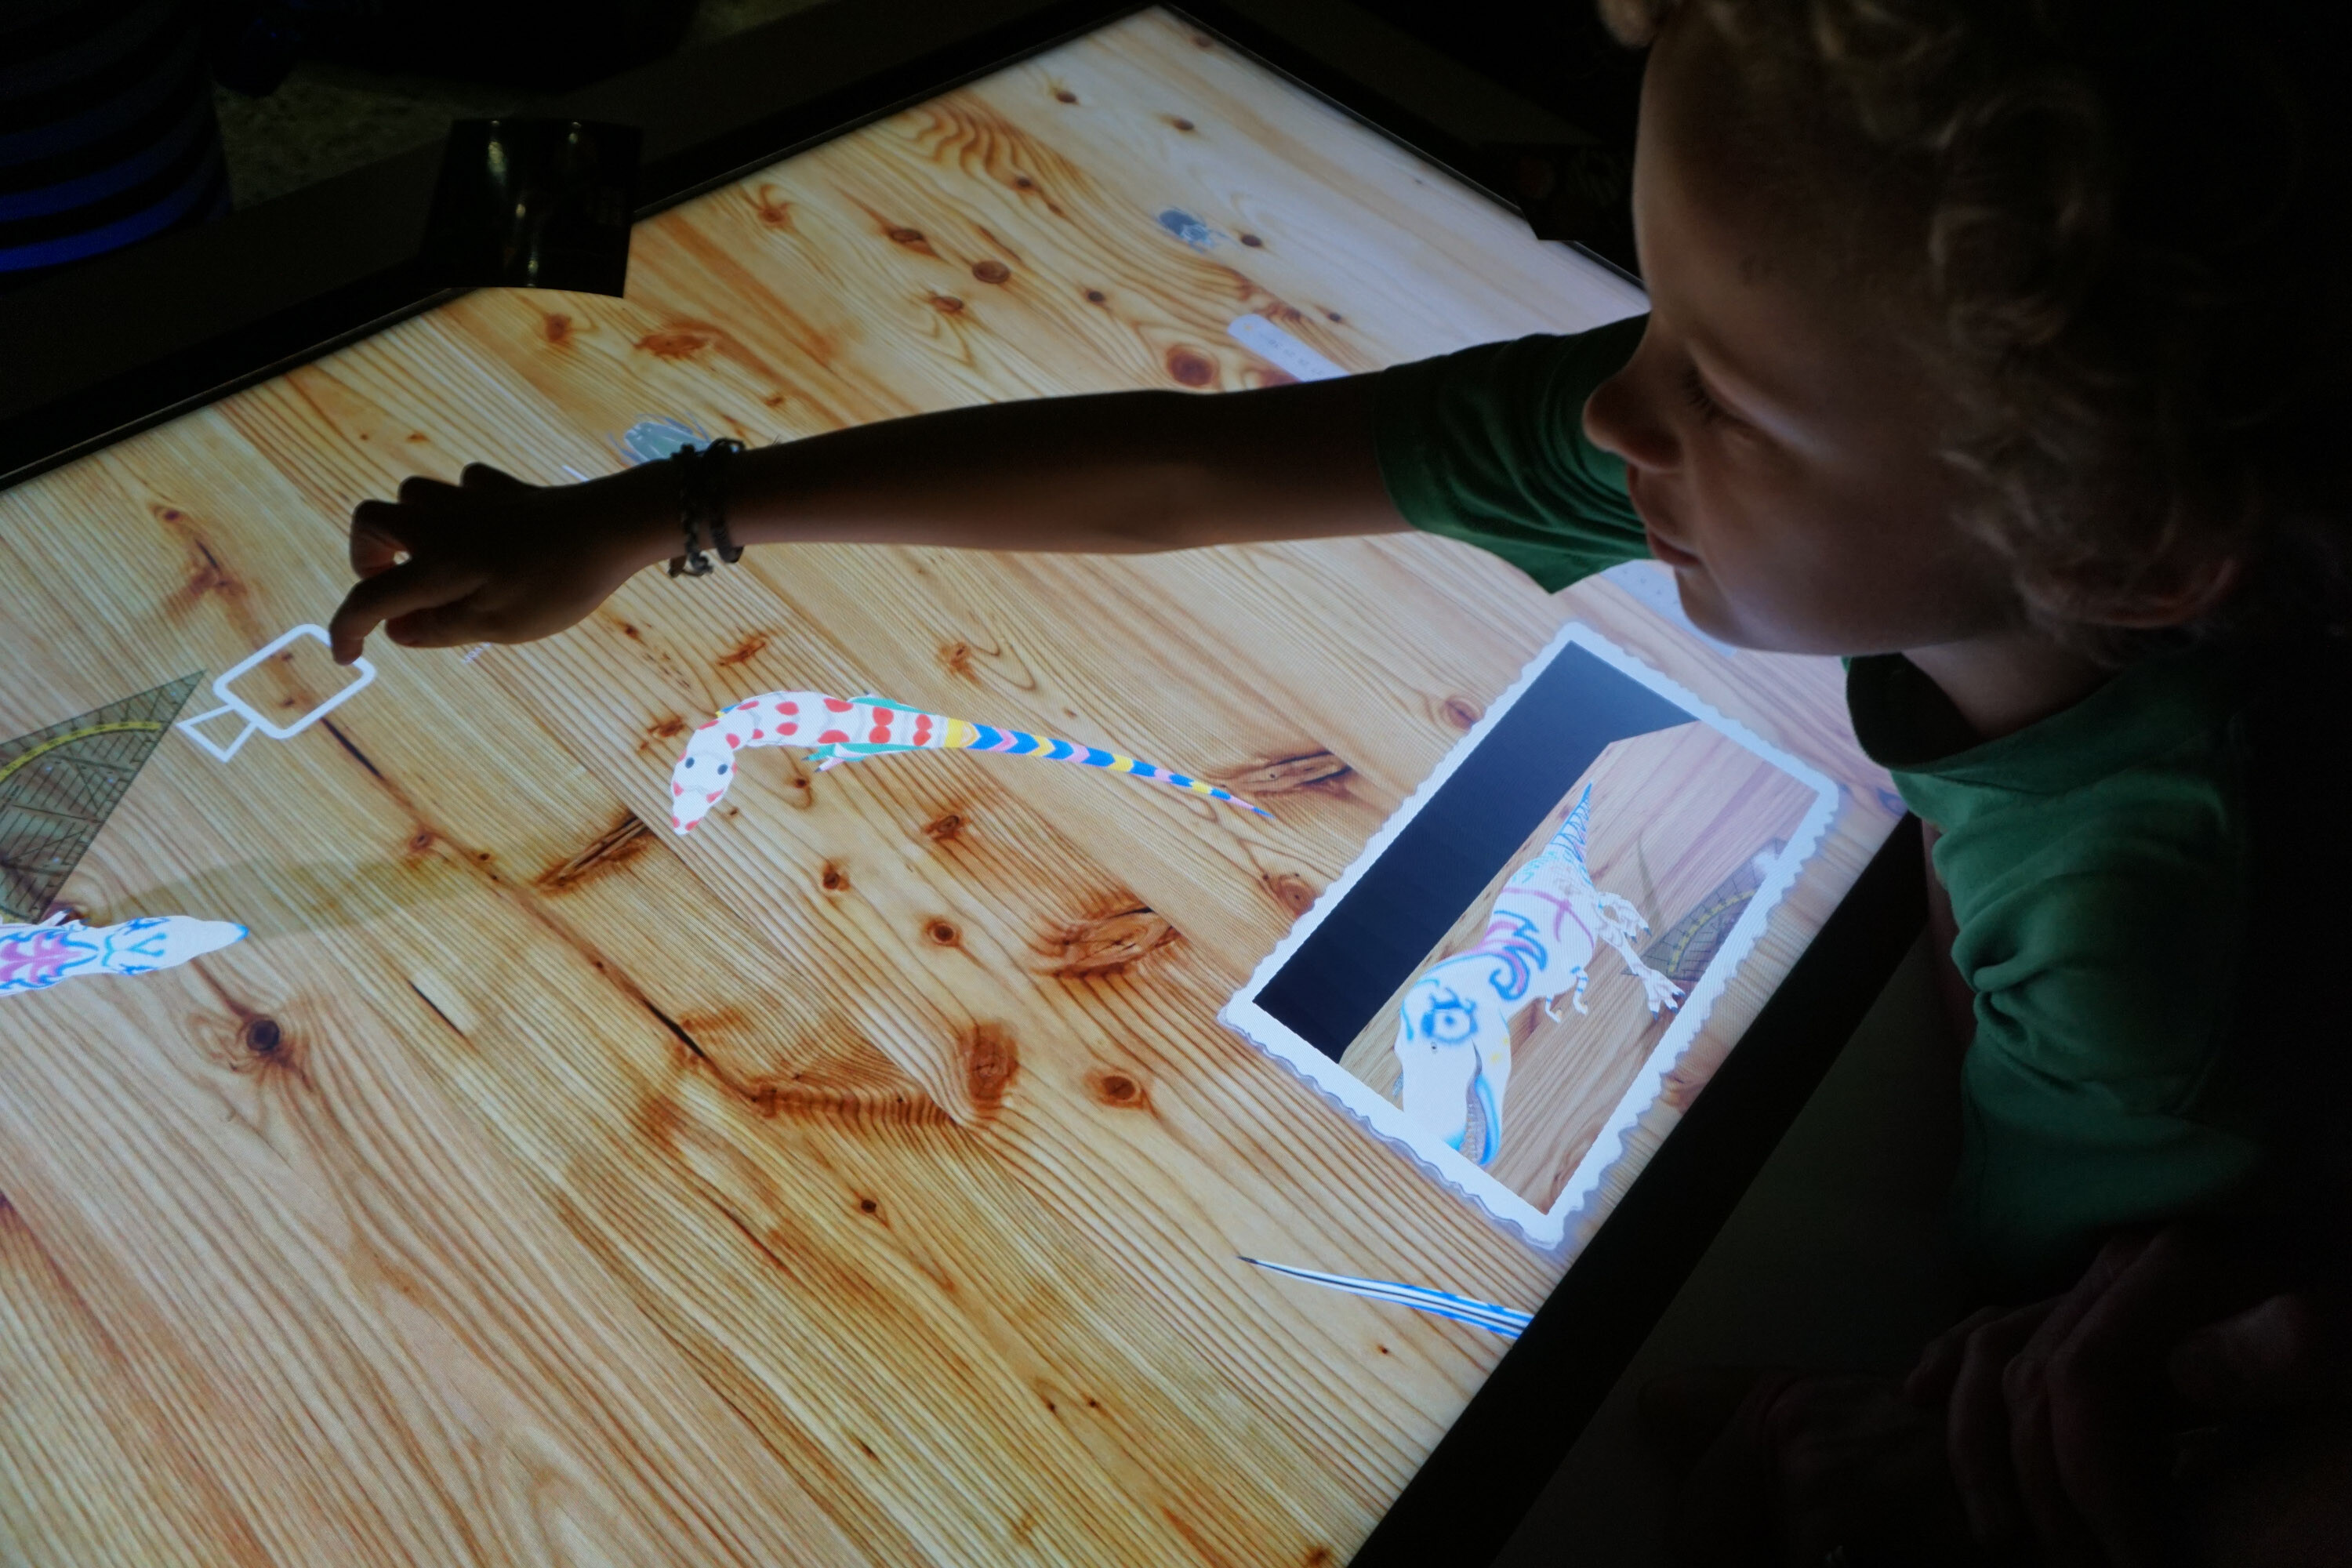 Multitouch software - interactive dinosaurs